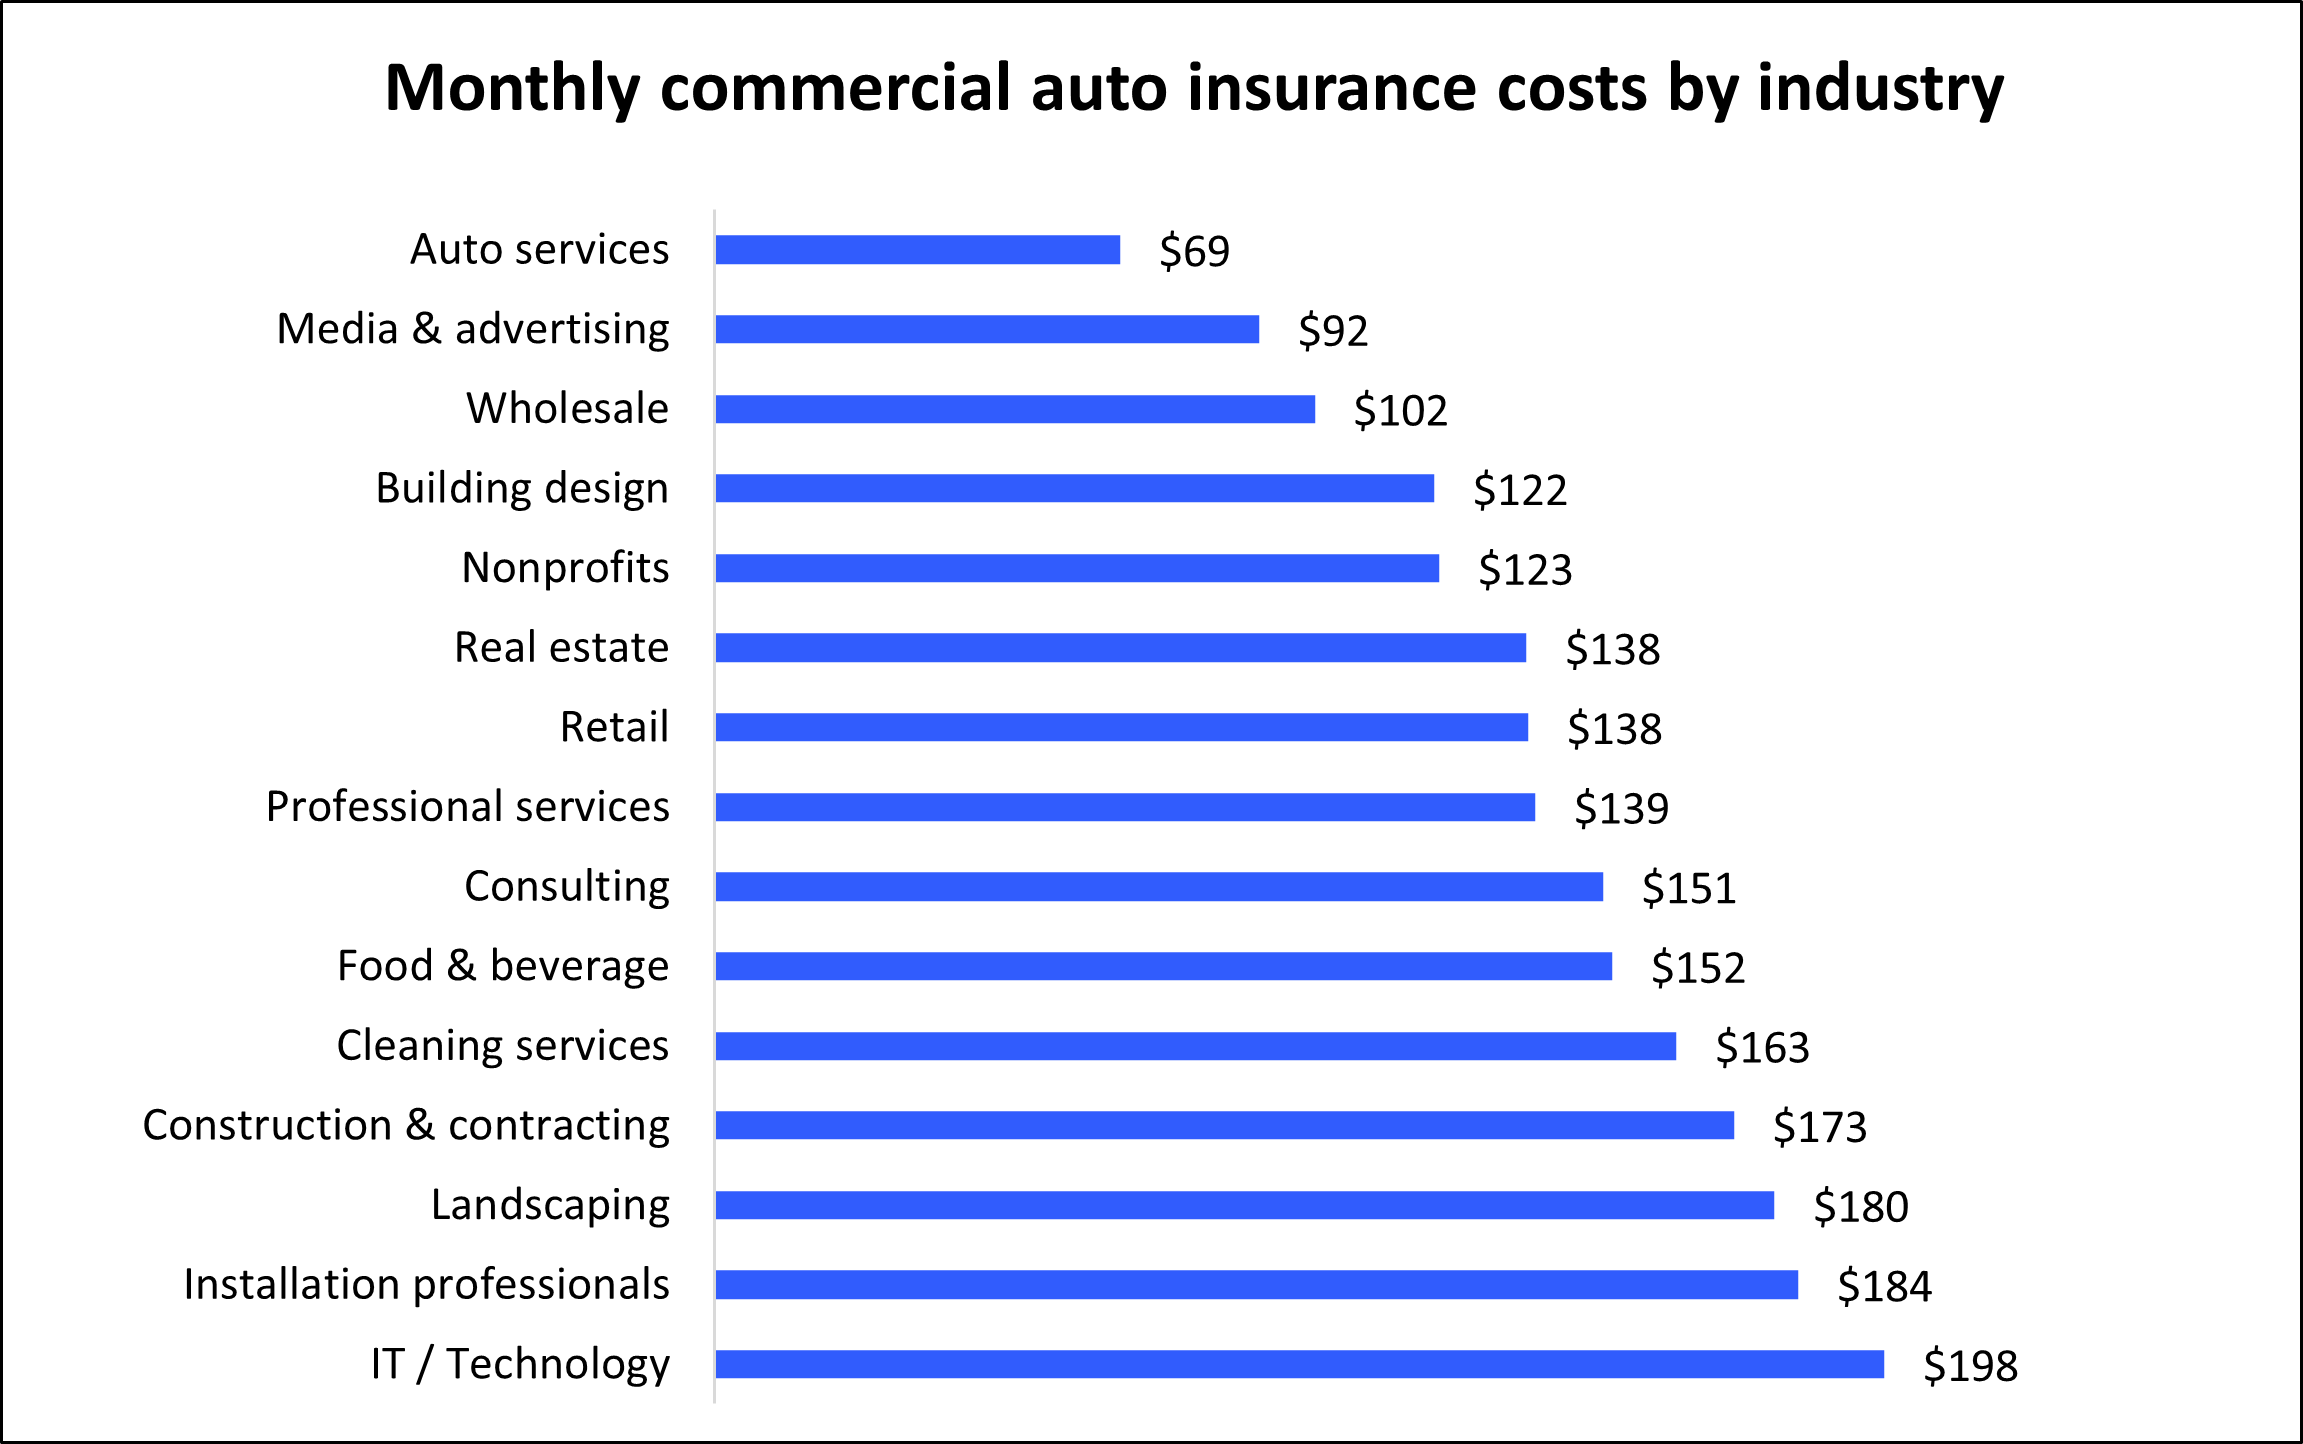 Monthly commercial auto insurance costs for Insureon customers by industry.